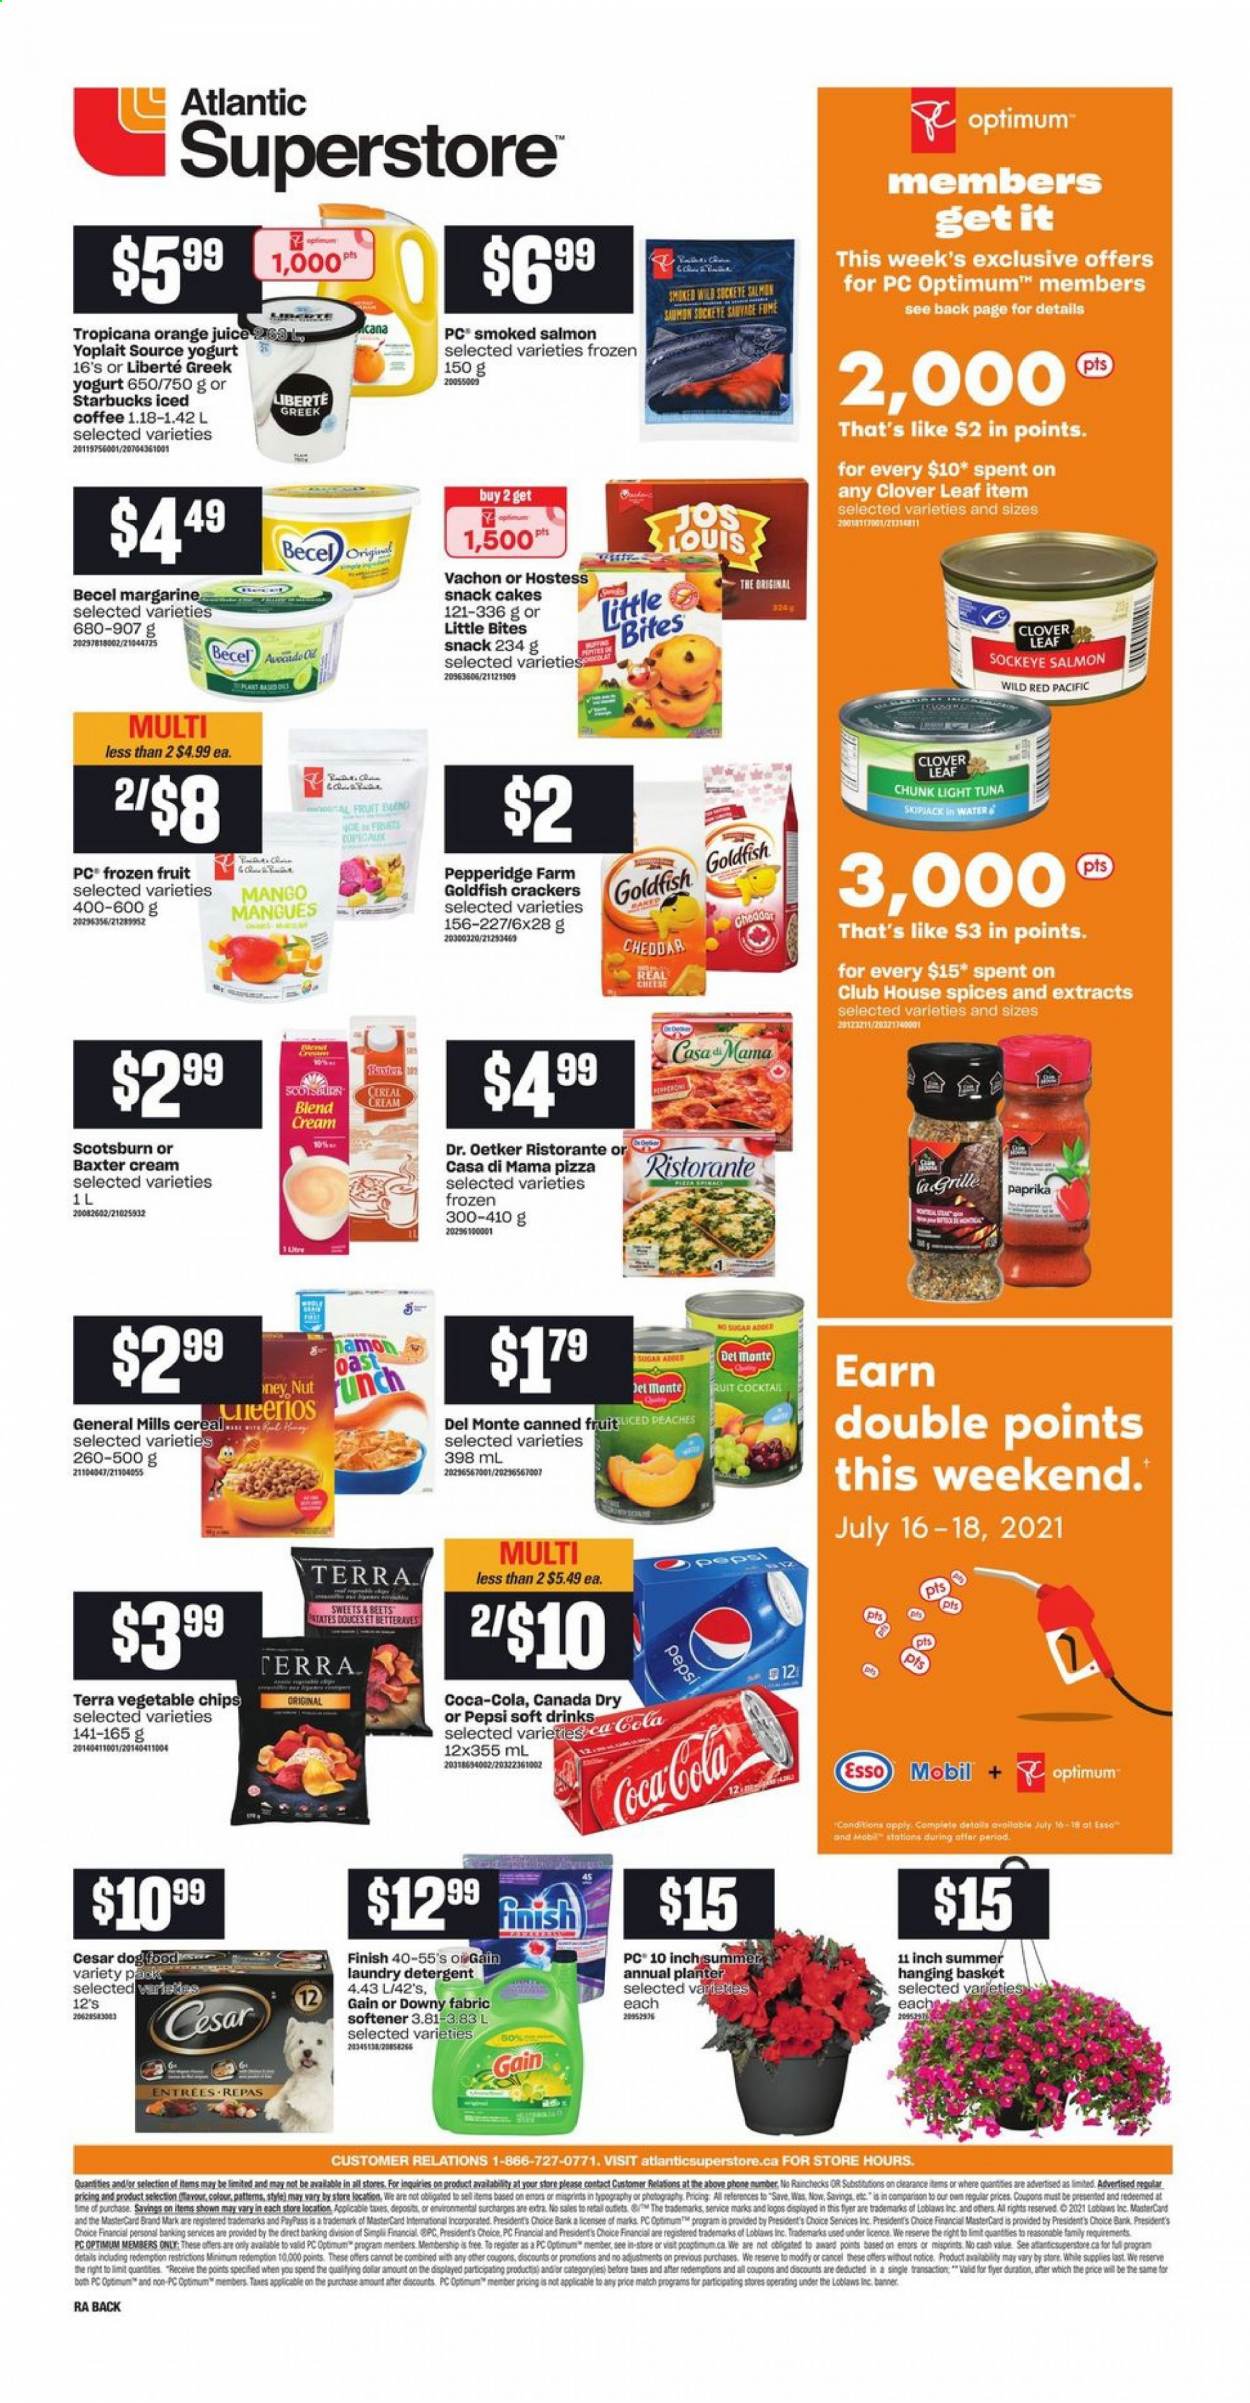 thumbnail - Atlantic Superstore Flyer - July 15, 2021 - July 21, 2021 - Sales products - cake, mango, peaches, salmon, smoked salmon, tuna, pizza, Dr. Oetker, Président, greek yoghurt, yoghurt, Clover, Yoplait, margarine, snack, crackers, Little Bites, vegetable chips, Goldfish, sugar, light tuna, canned fruit, cereals, Canada Dry, Coca-Cola, Pepsi, orange juice, juice, soft drink, iced coffee, Starbucks, Gain, fabric softener, laundry detergent, Downy Laundry, Jet, Optimum. Page 2.